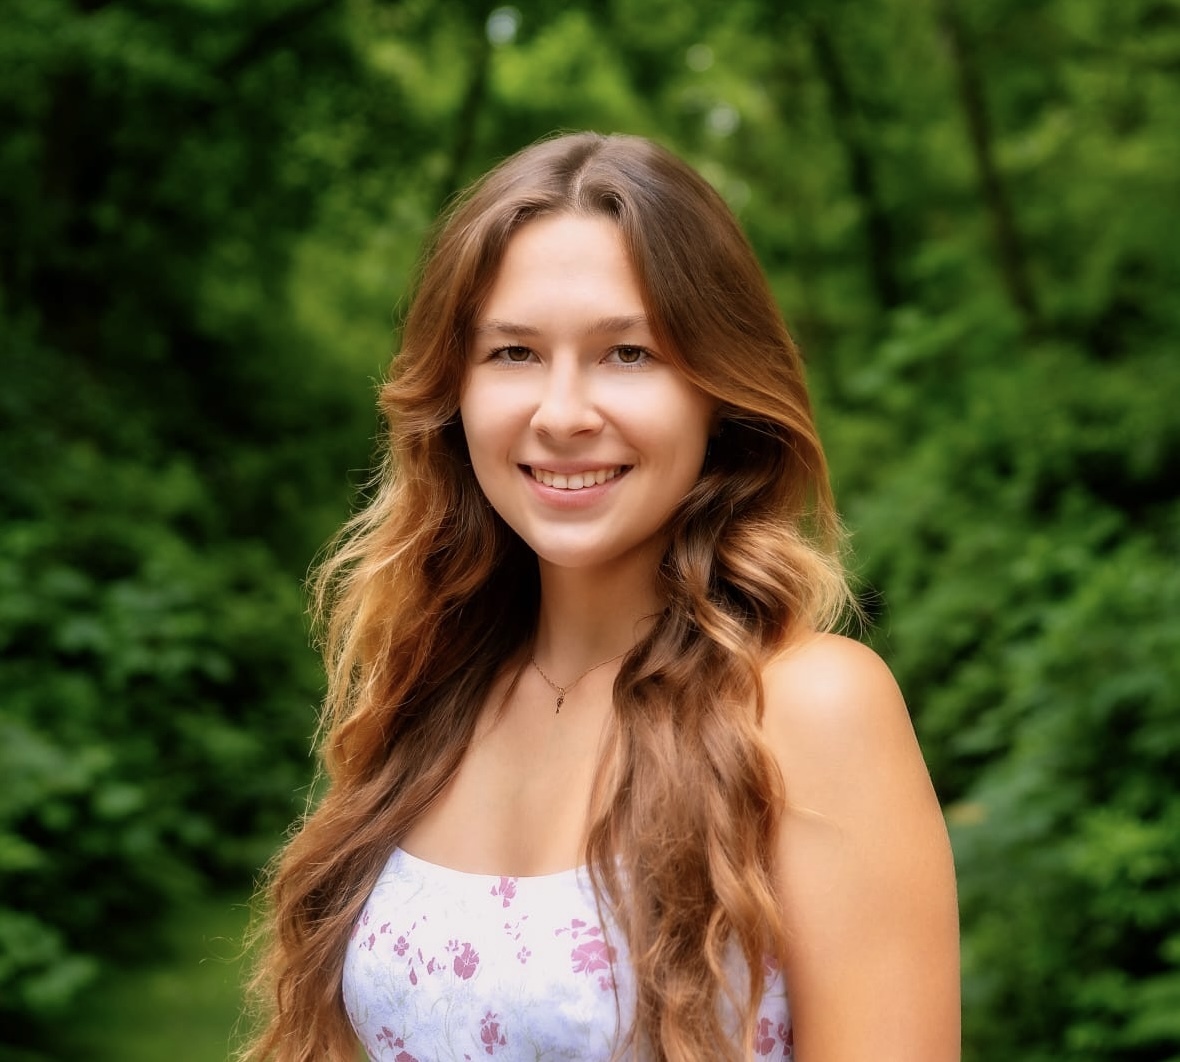 Headshot of Research Programmer Sophie Krivonosov wearing a floral top and standing in front of green foliage